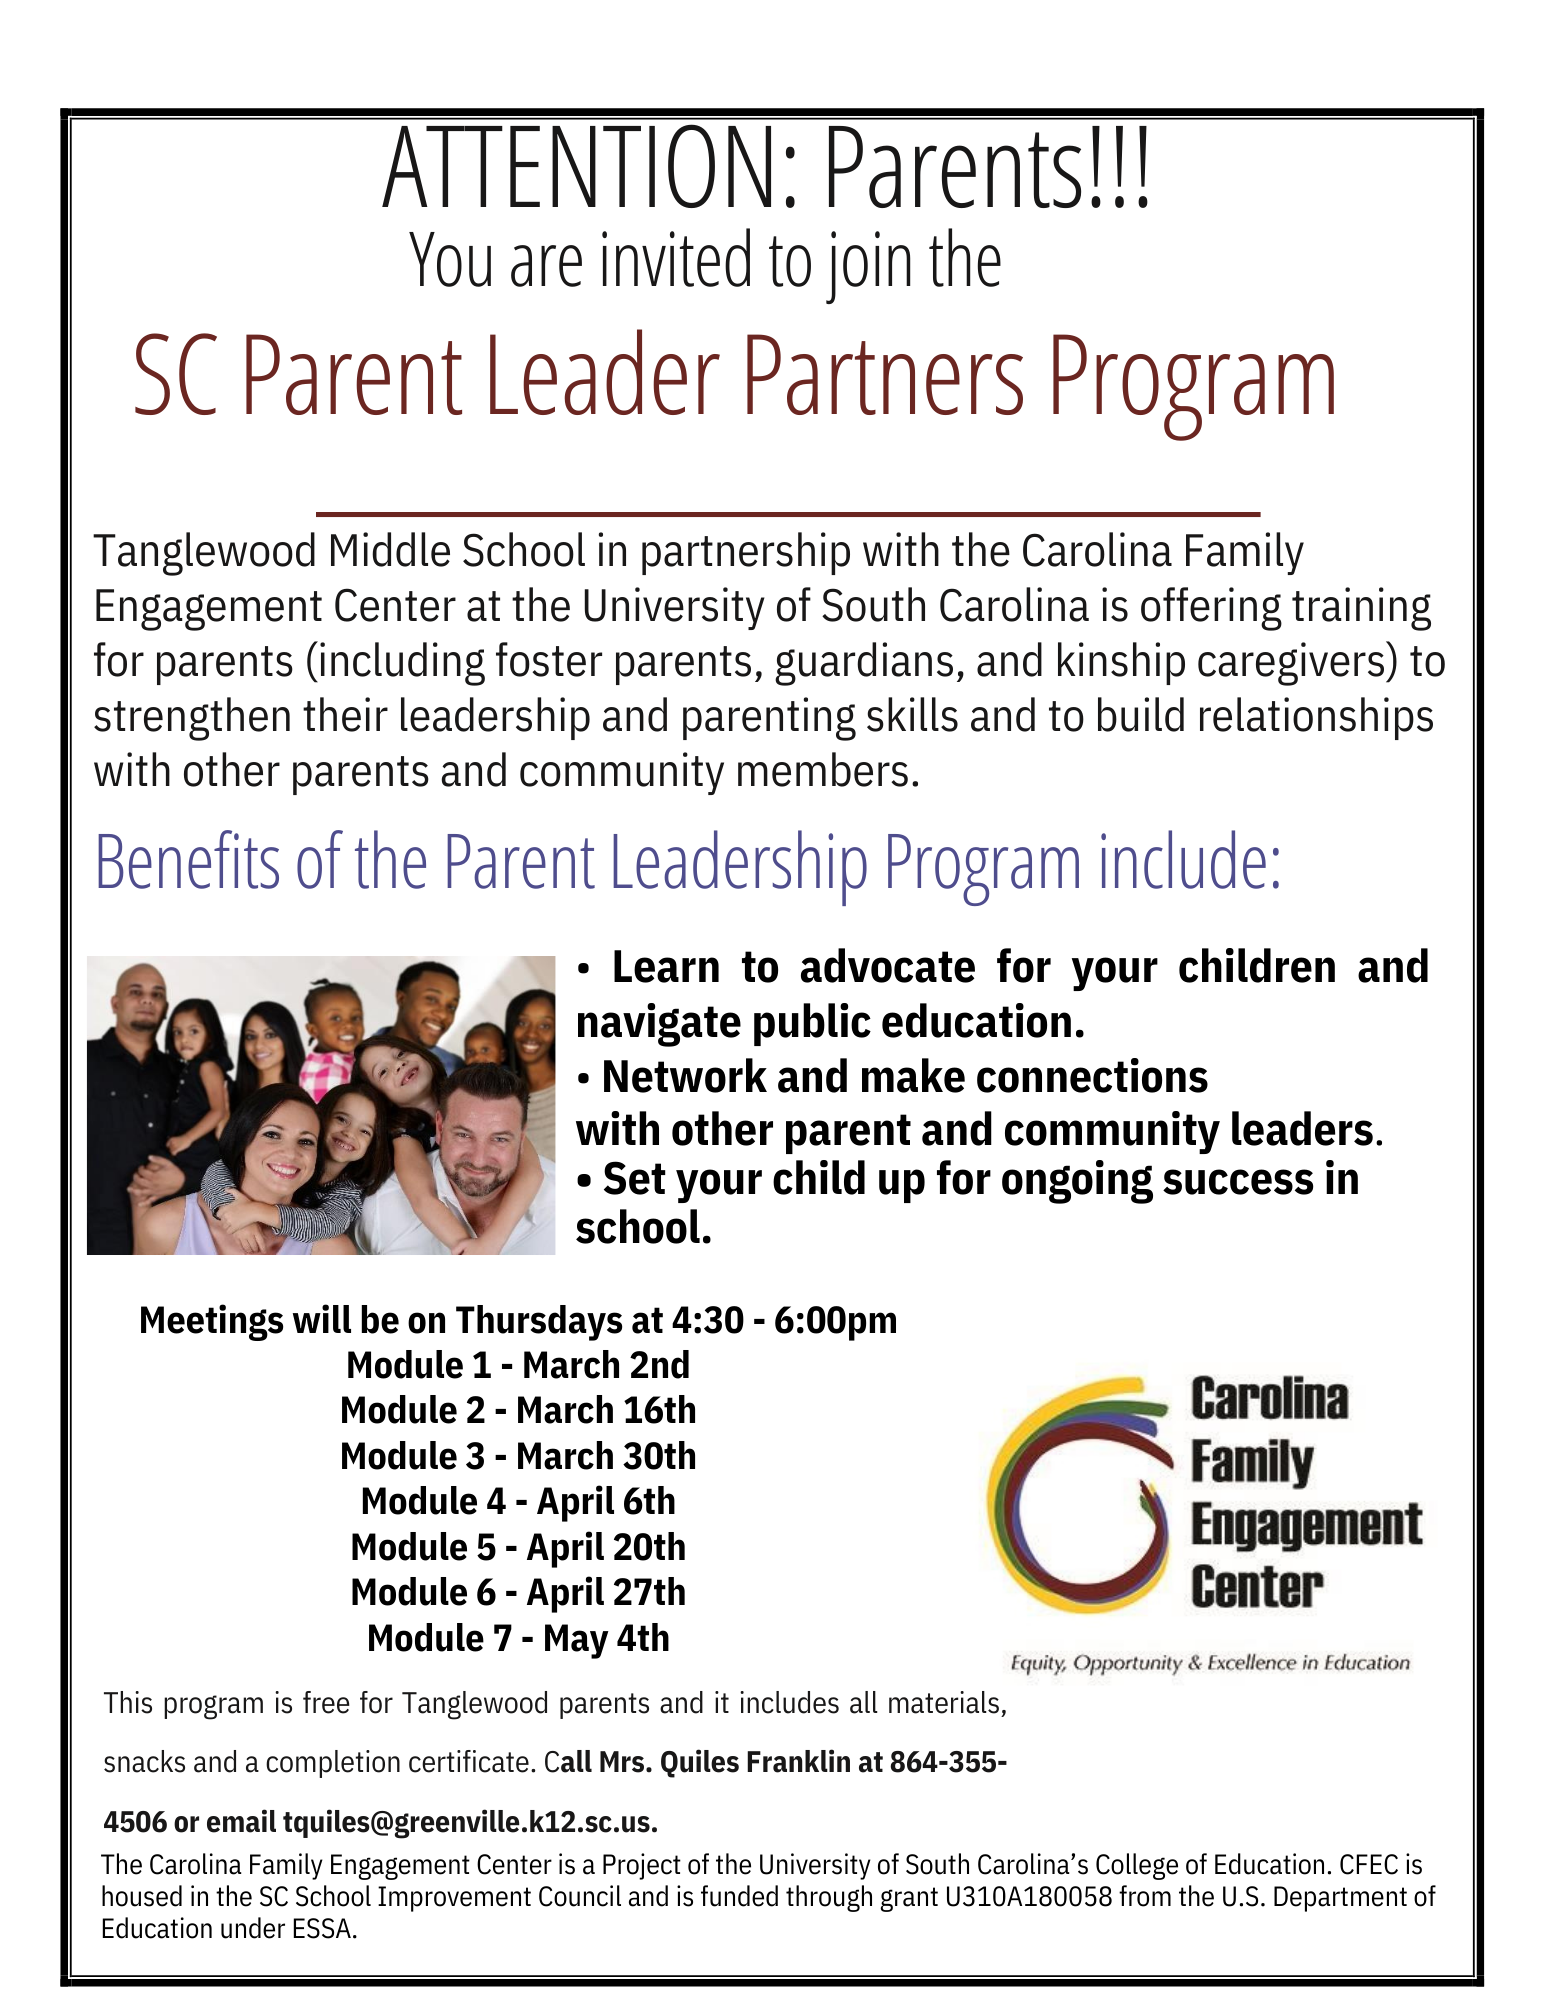 SC Parent Leadership Flyer with same info that appears in this announcement, photo of adults with children logo of Carolina family engagement center yellow, green blue red swirl